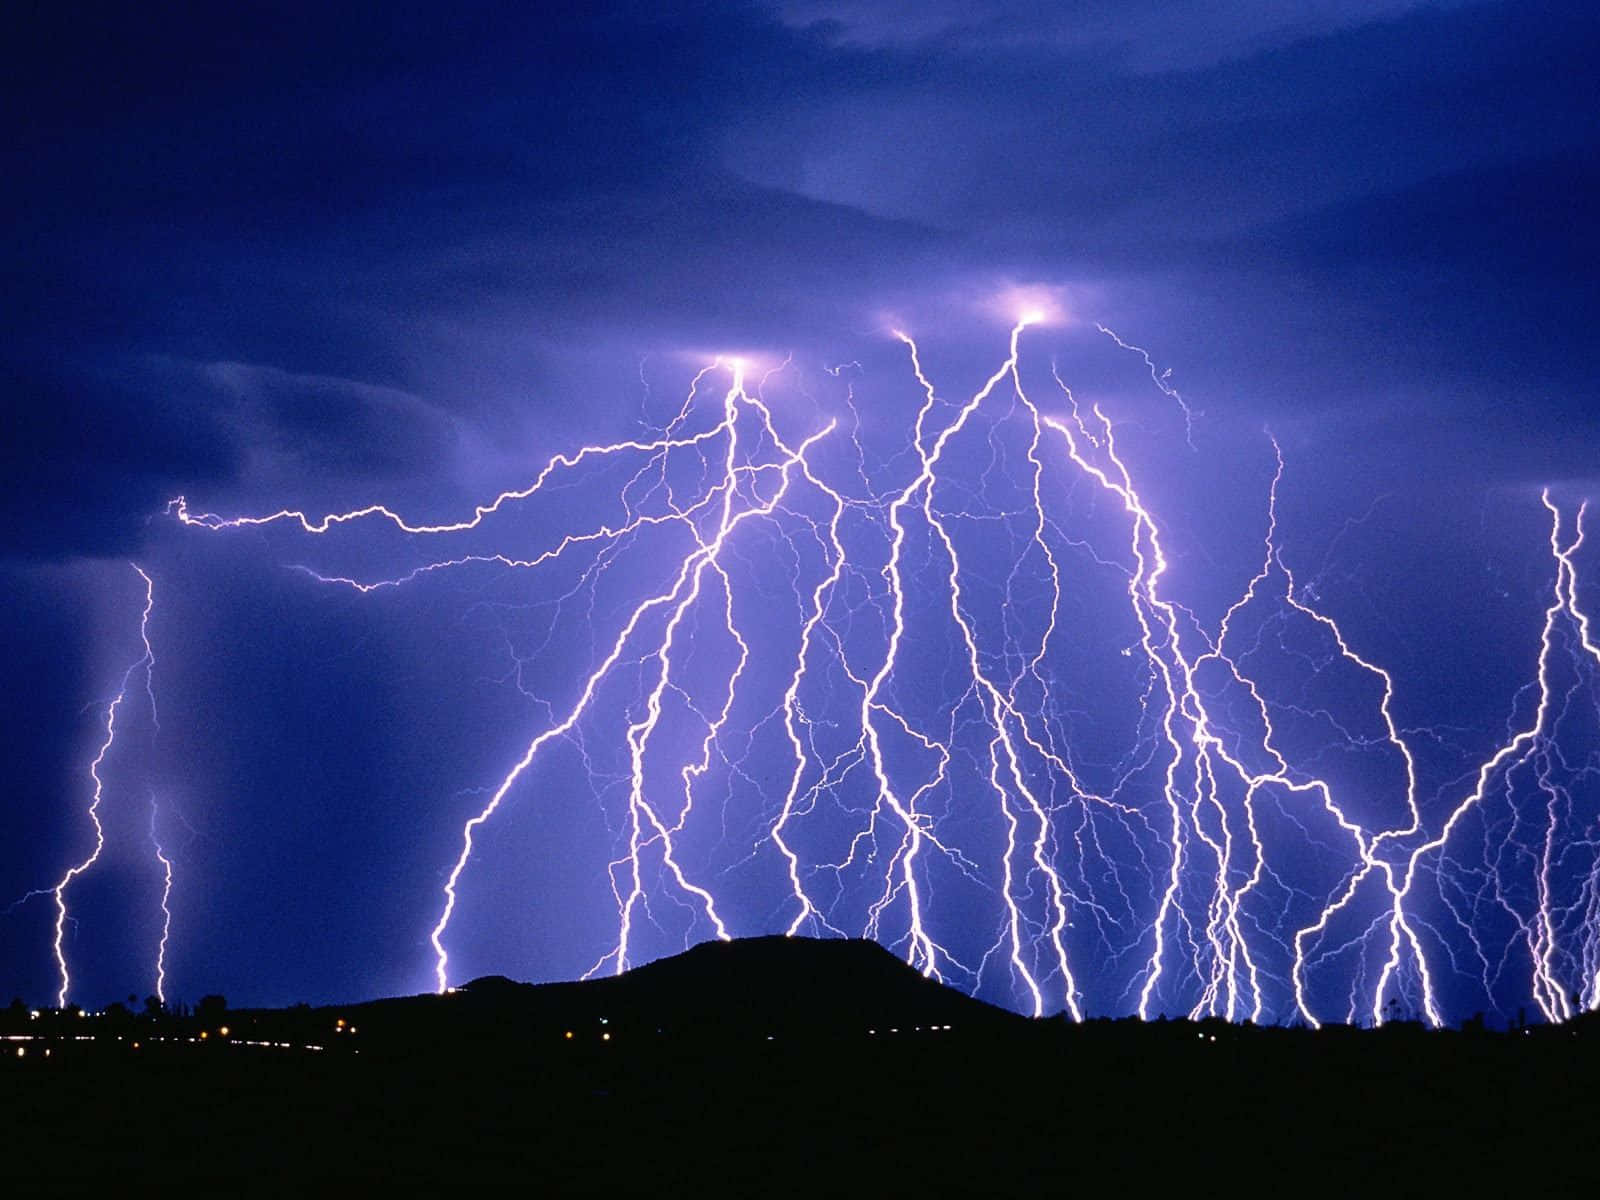 Brighten Up The Night With Cool Lightning Wallpaper